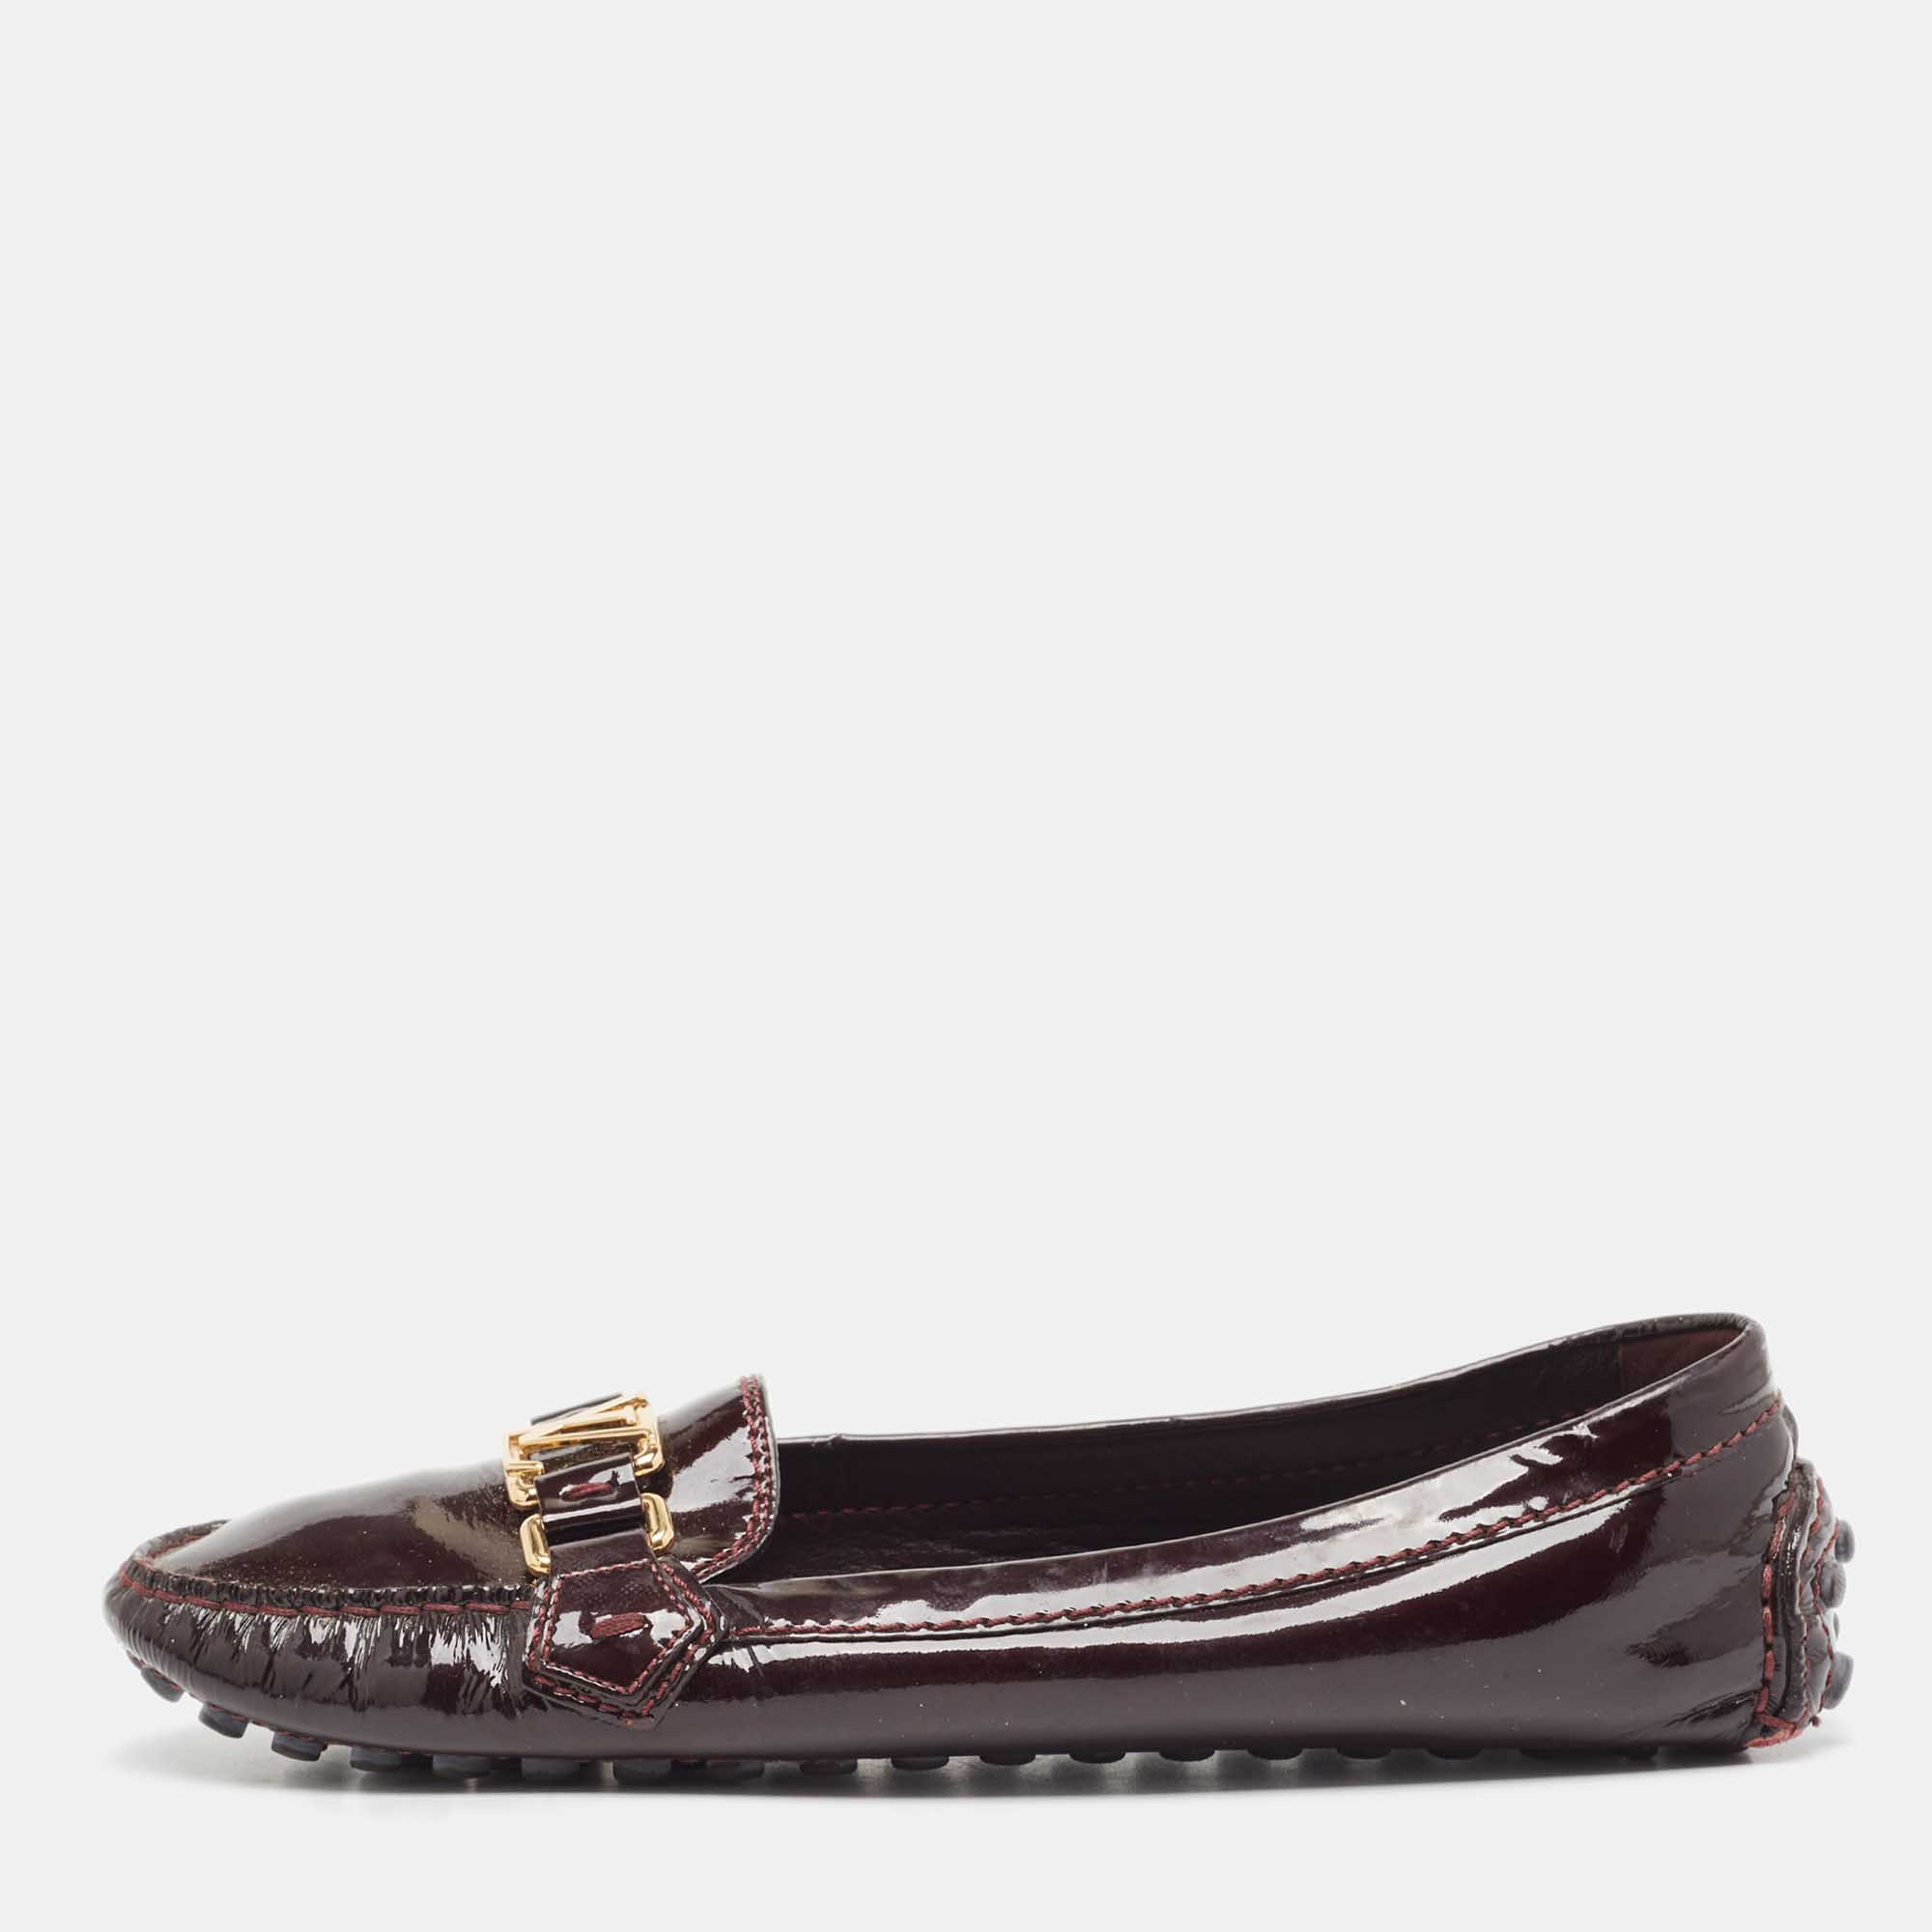 Pre-owned Louis Vuitton Burgundy Patent Leather Oxford Loafers Size 39